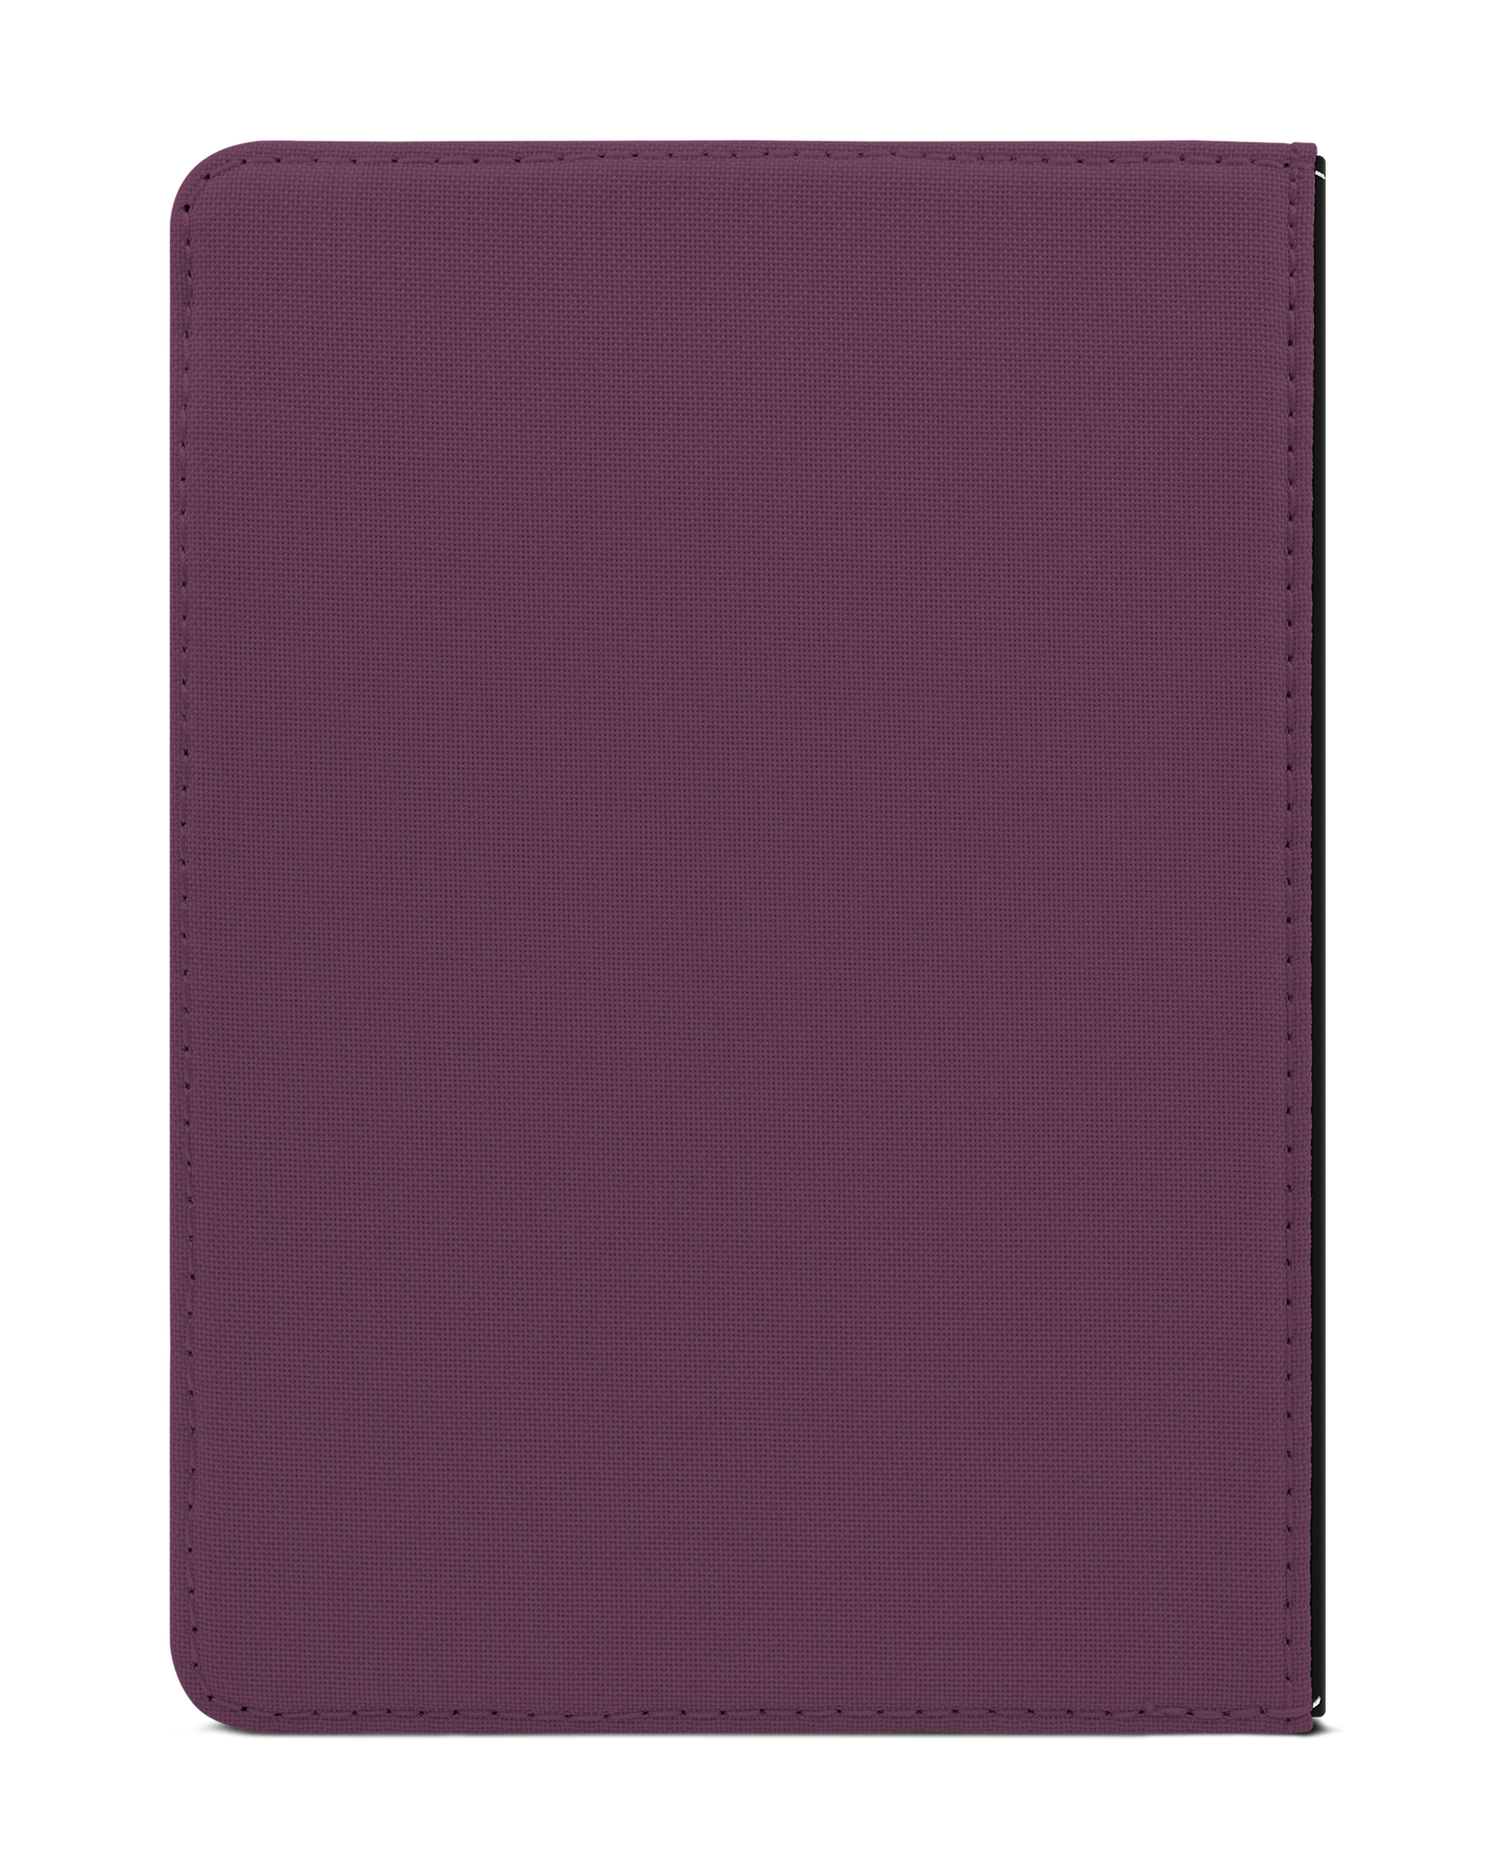 PLUM eReader Case for tolino vision 1 to 4 HD: Back View